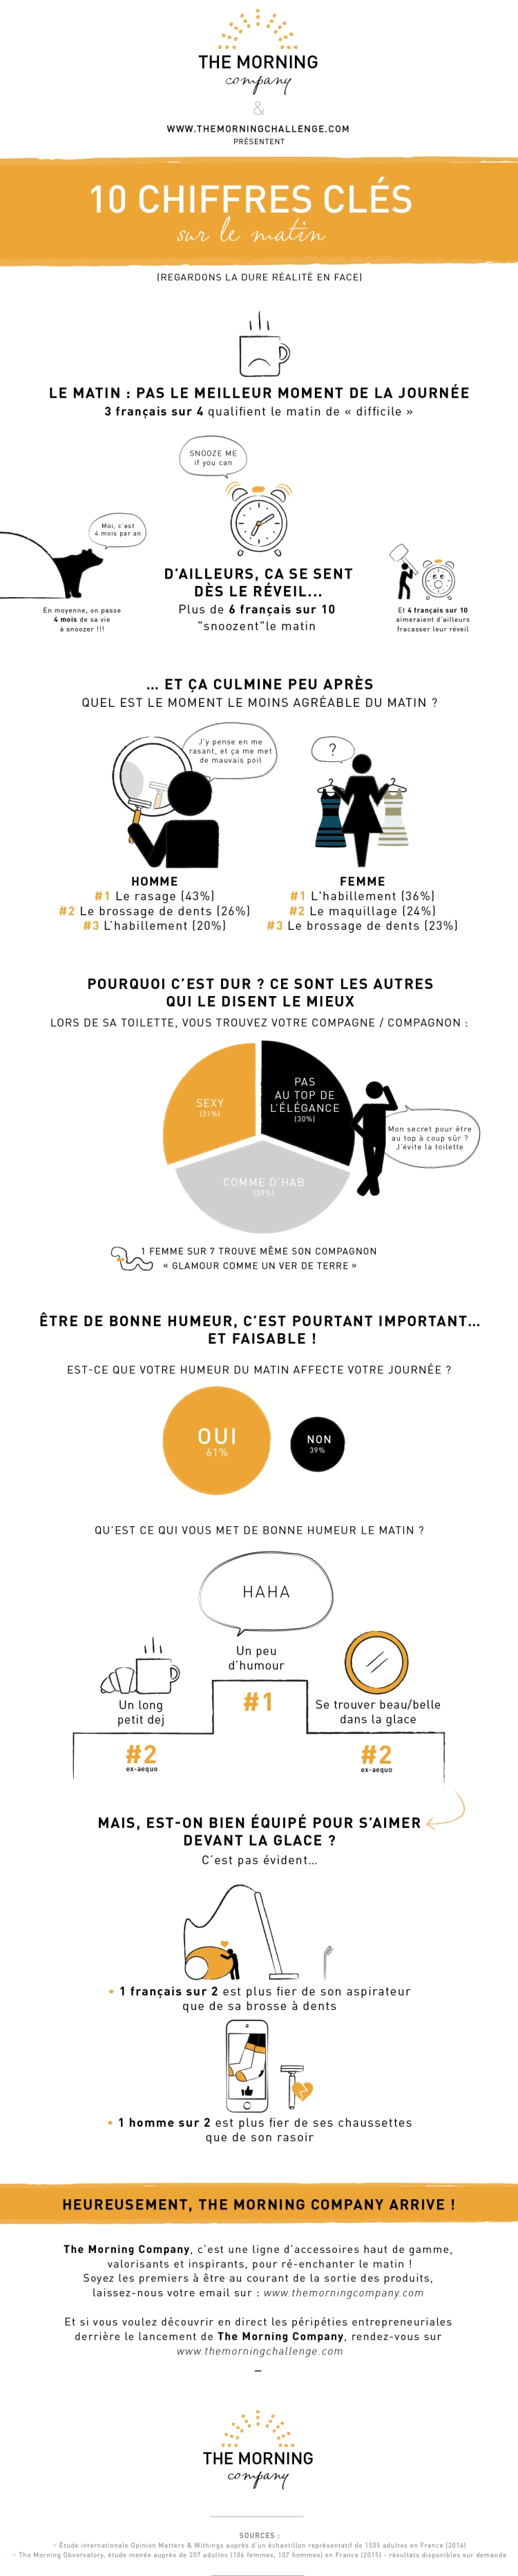 Infographie - 10 chiffres clés du matin - The Morning Challenge